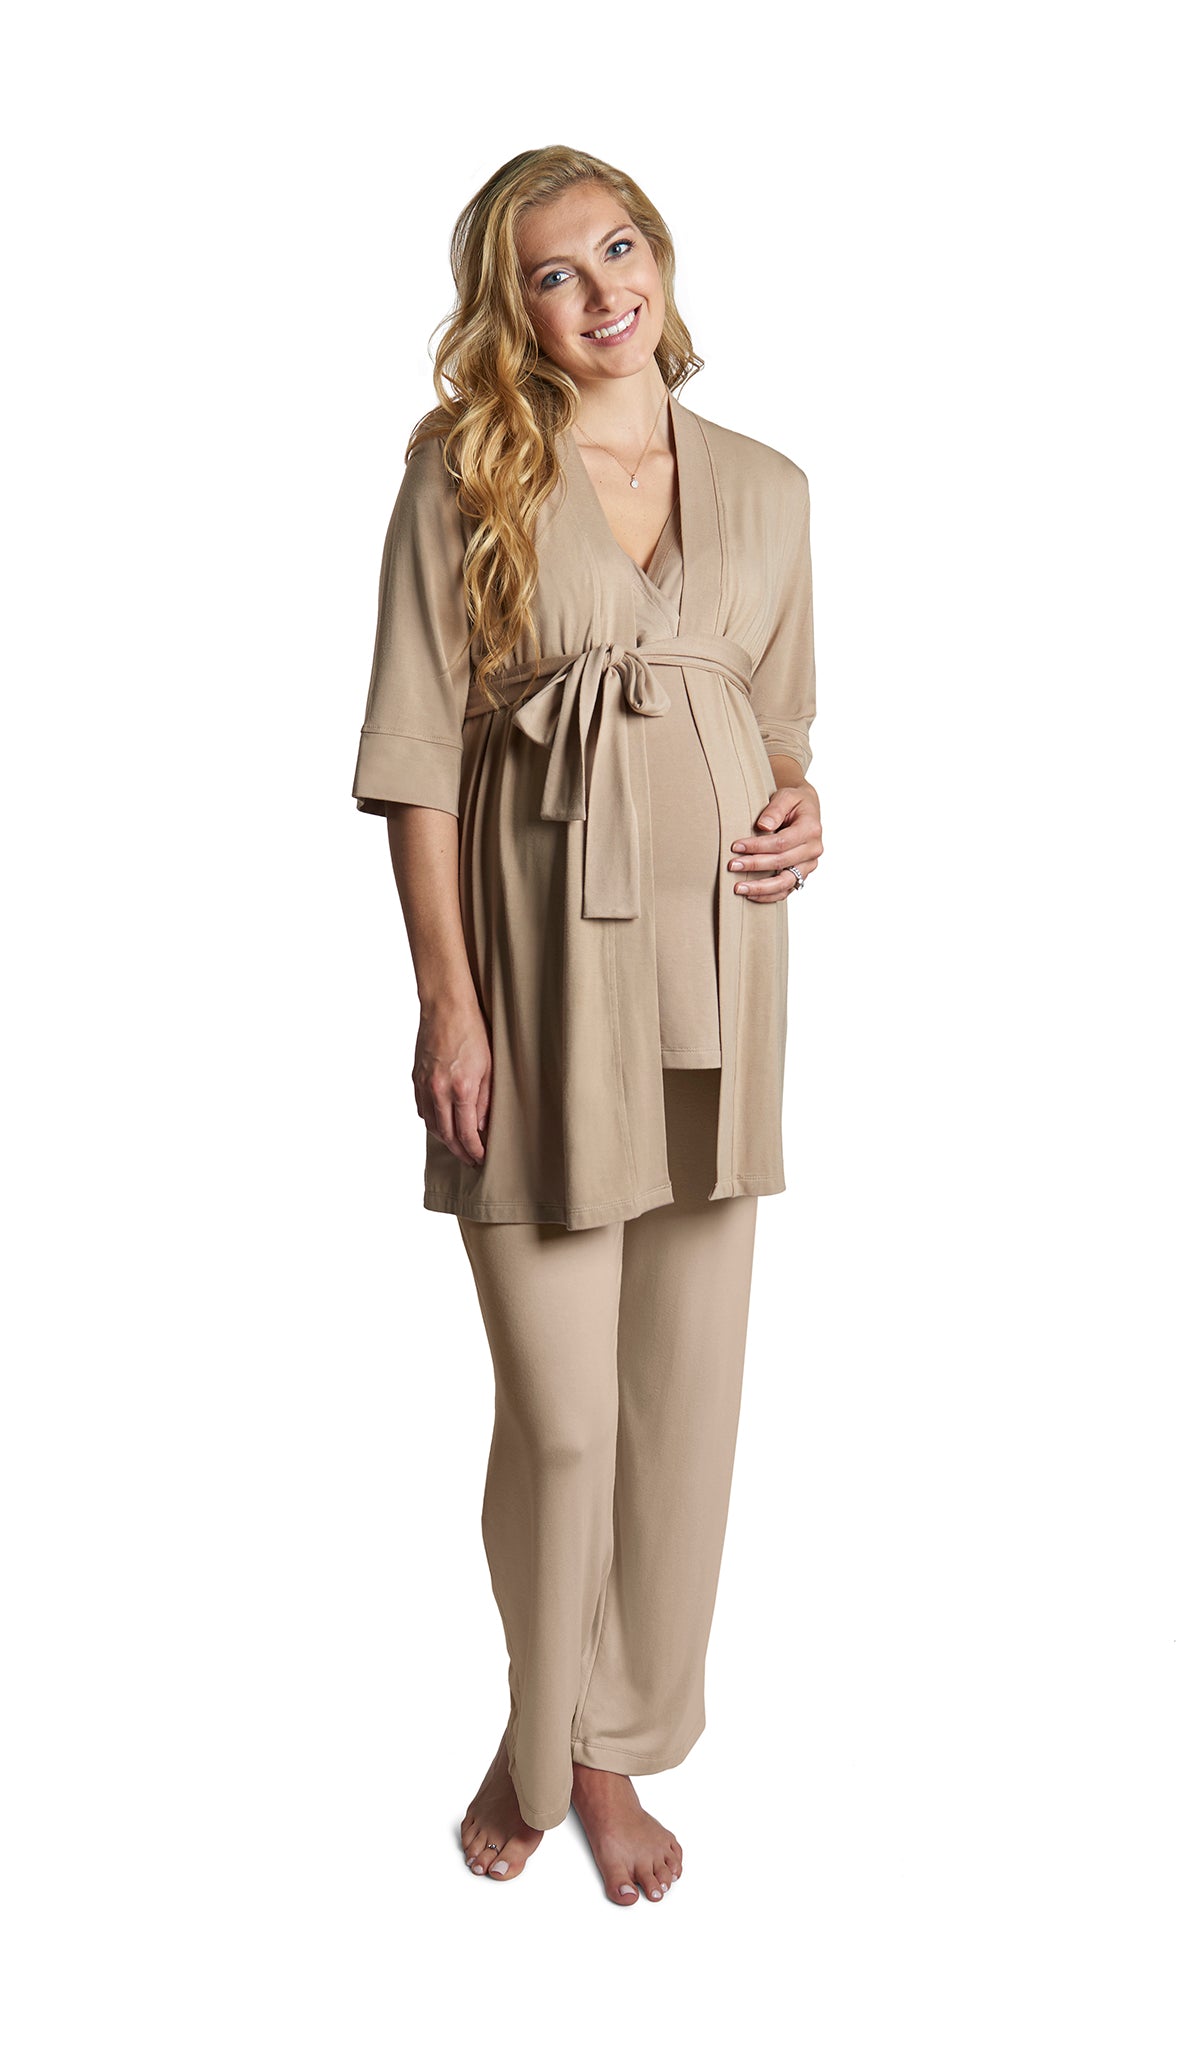 Latte Analise 3-Piece Set. Pregnant woman wearing 3/4 sleeve robe, tank top and pant.